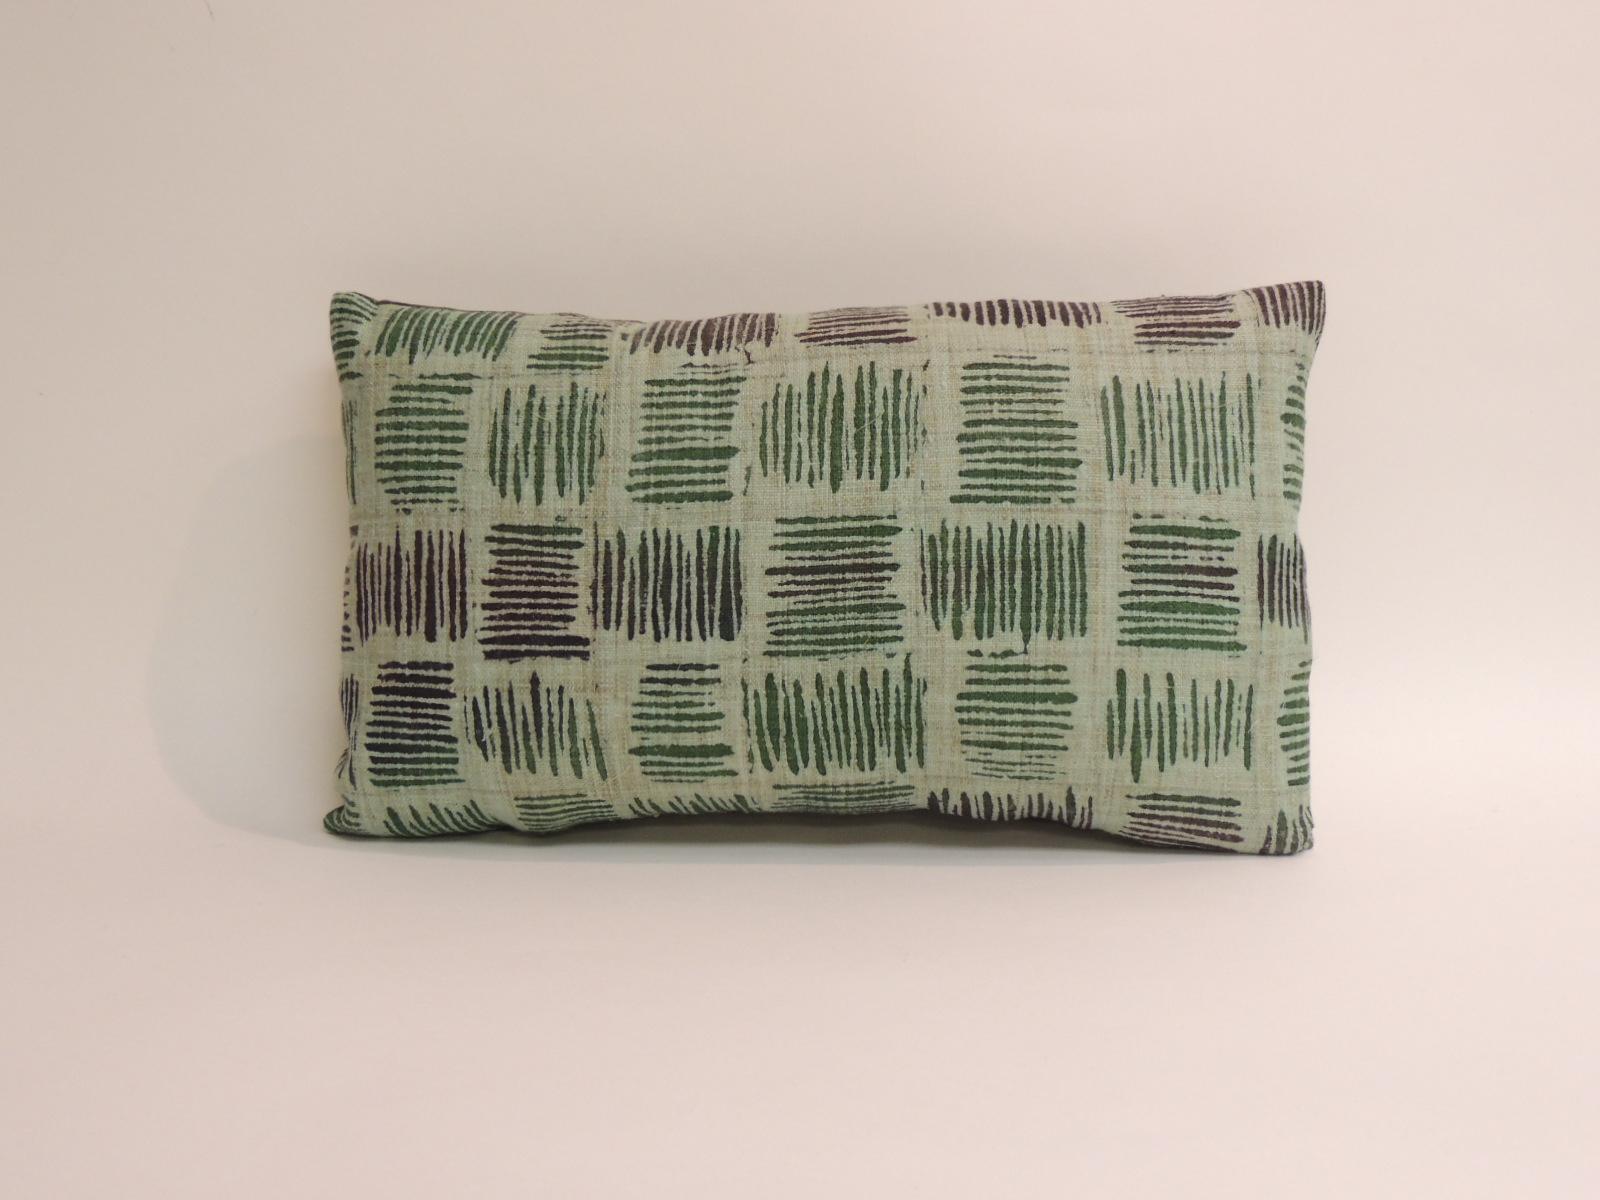 Hand-Crafted Vintage Hand Blocked Green and Black Decorative Lumbar Pillow